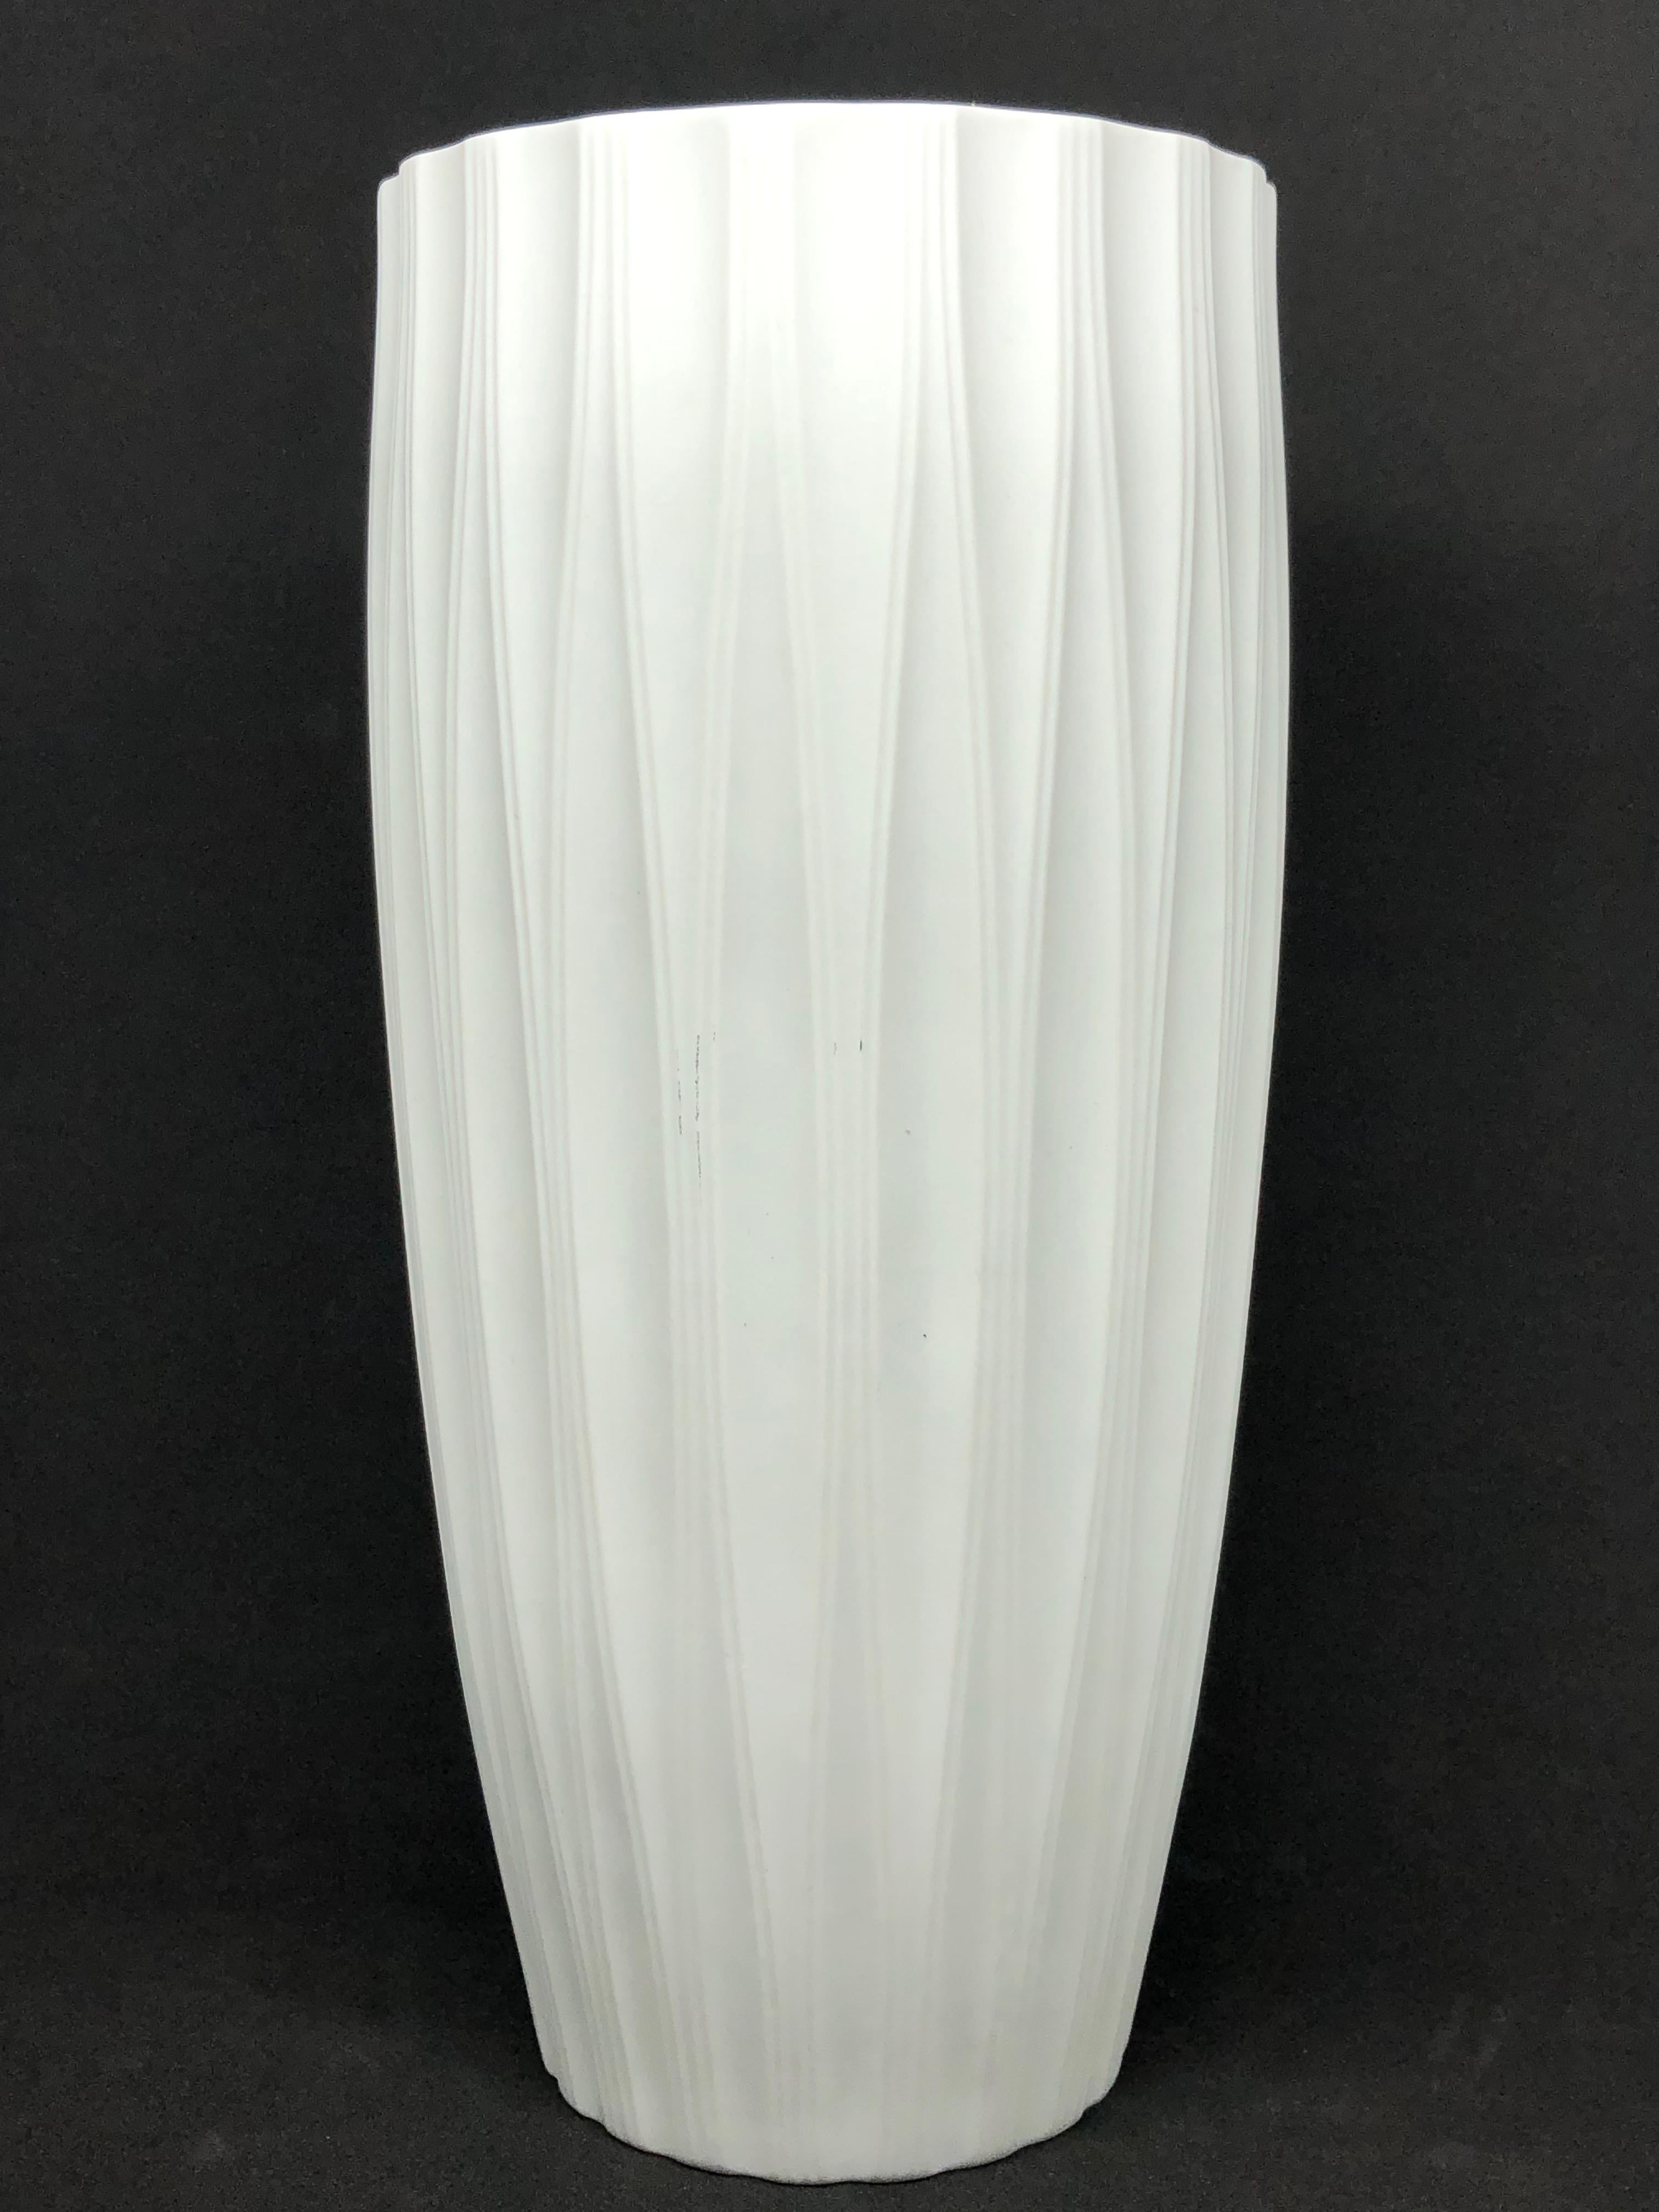 This lovely fluted-shaped vase from Hutschenreuther brings a touch of elegant sophistication to any household. Ideal placed by the window or on any end table.